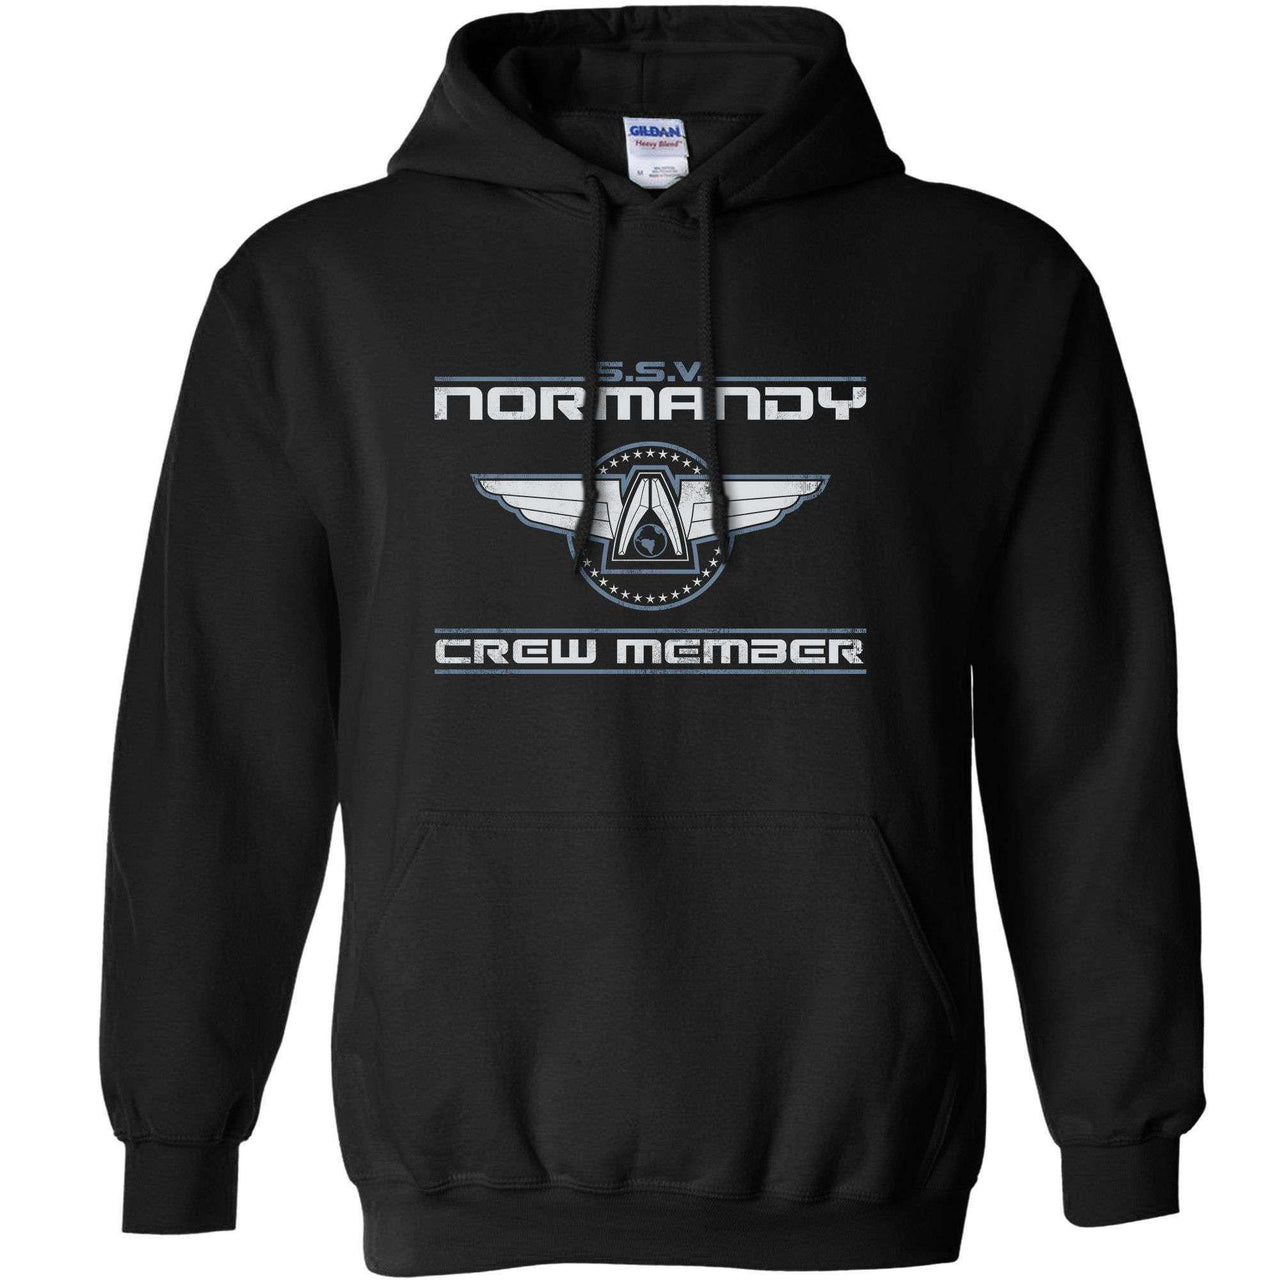 SSV Normandy Hoodie For Men and Women 8Ball